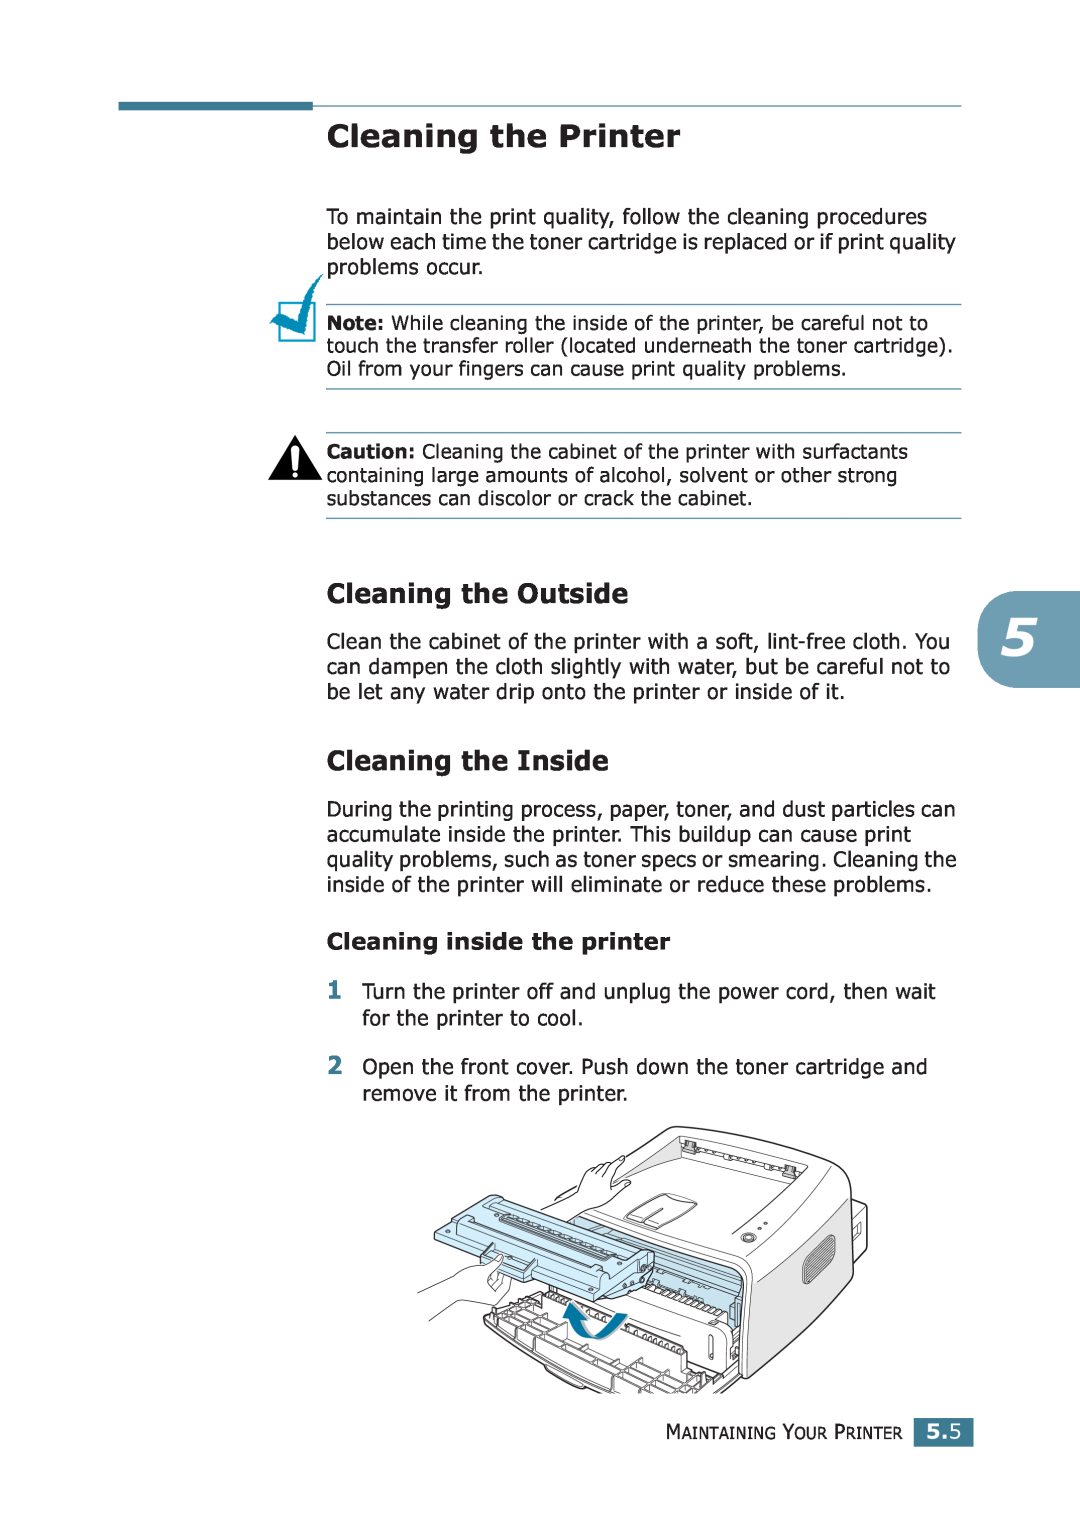 Samsung ML-1710P manual Cleaning the Printer, Cleaning the Outside, Cleaning the Inside, Cleaning inside the printer 